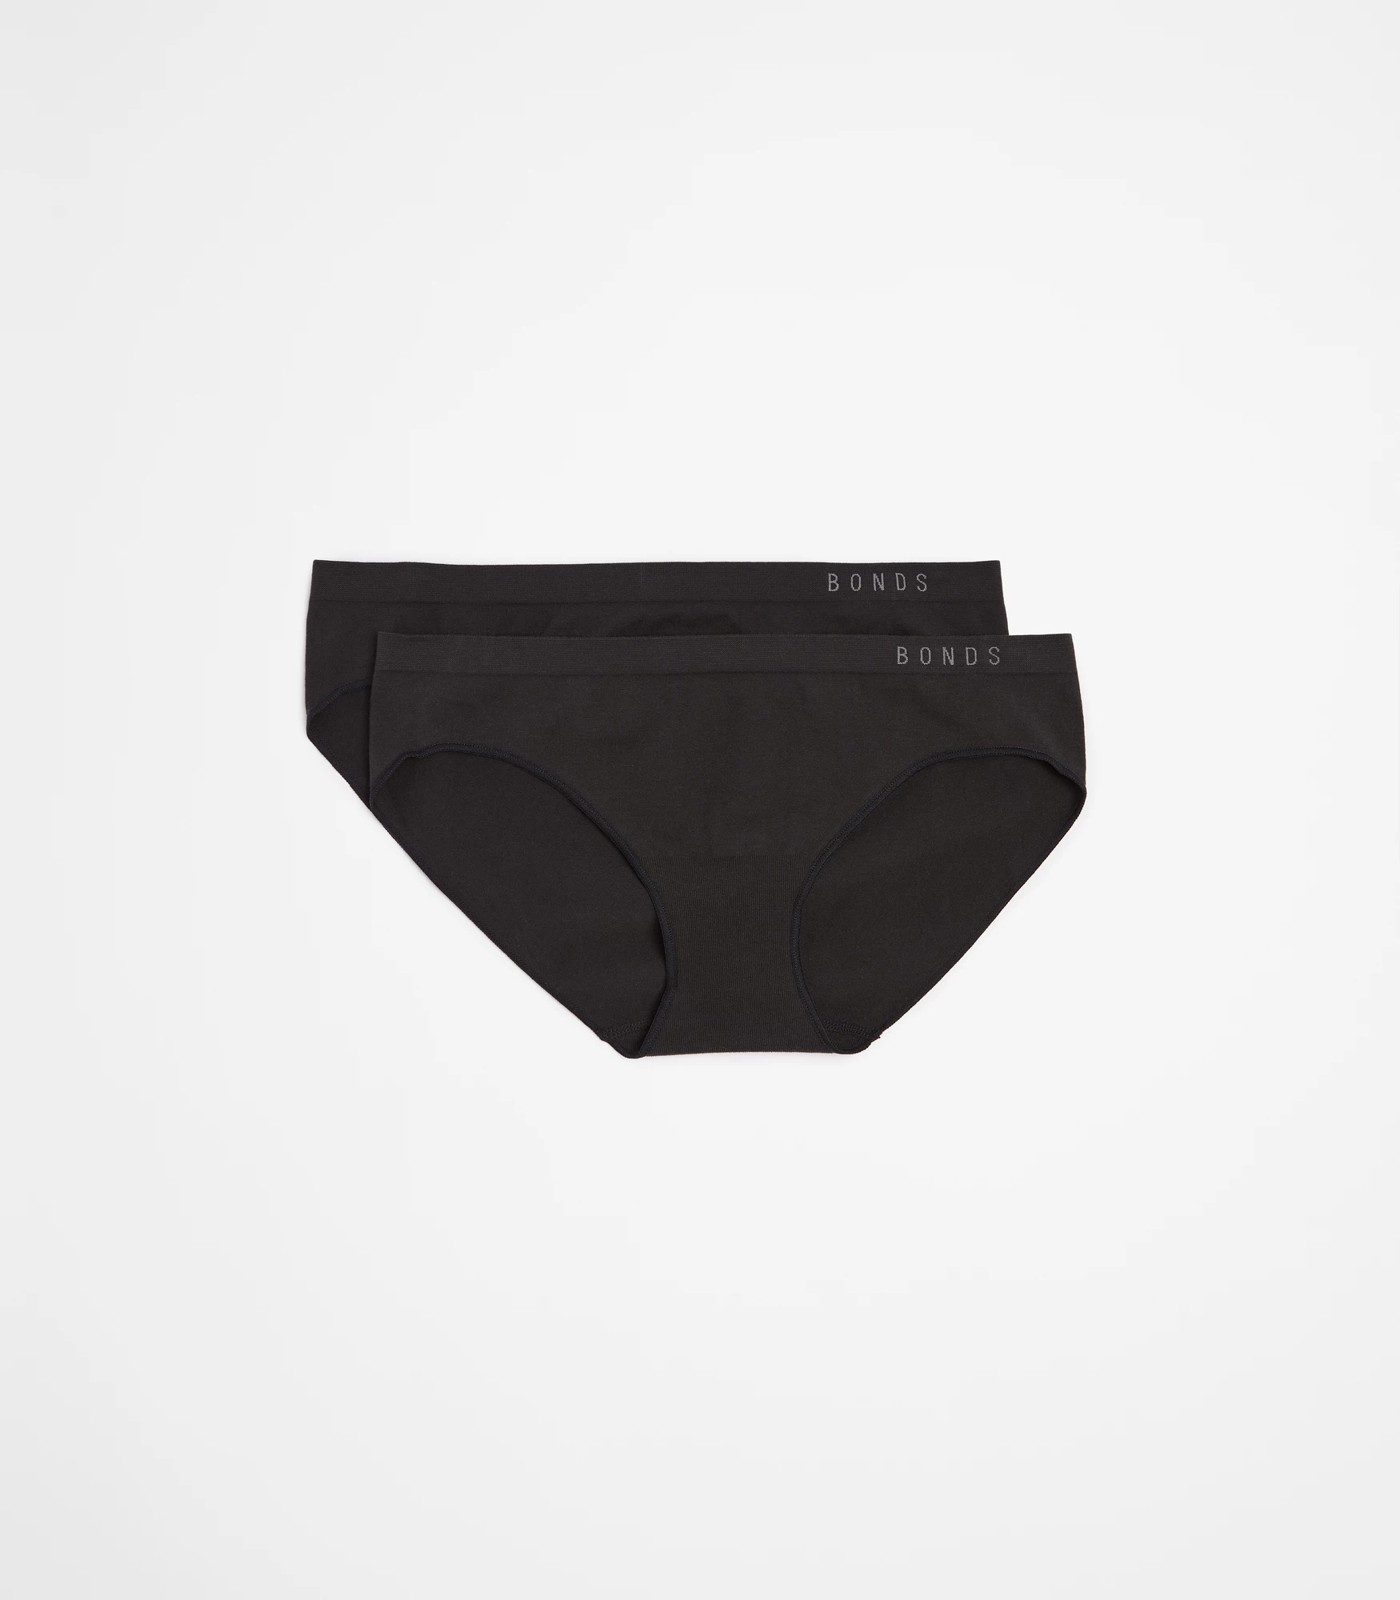 Bonds Seamless Full Brief Size 14 Assorted 2 Pack